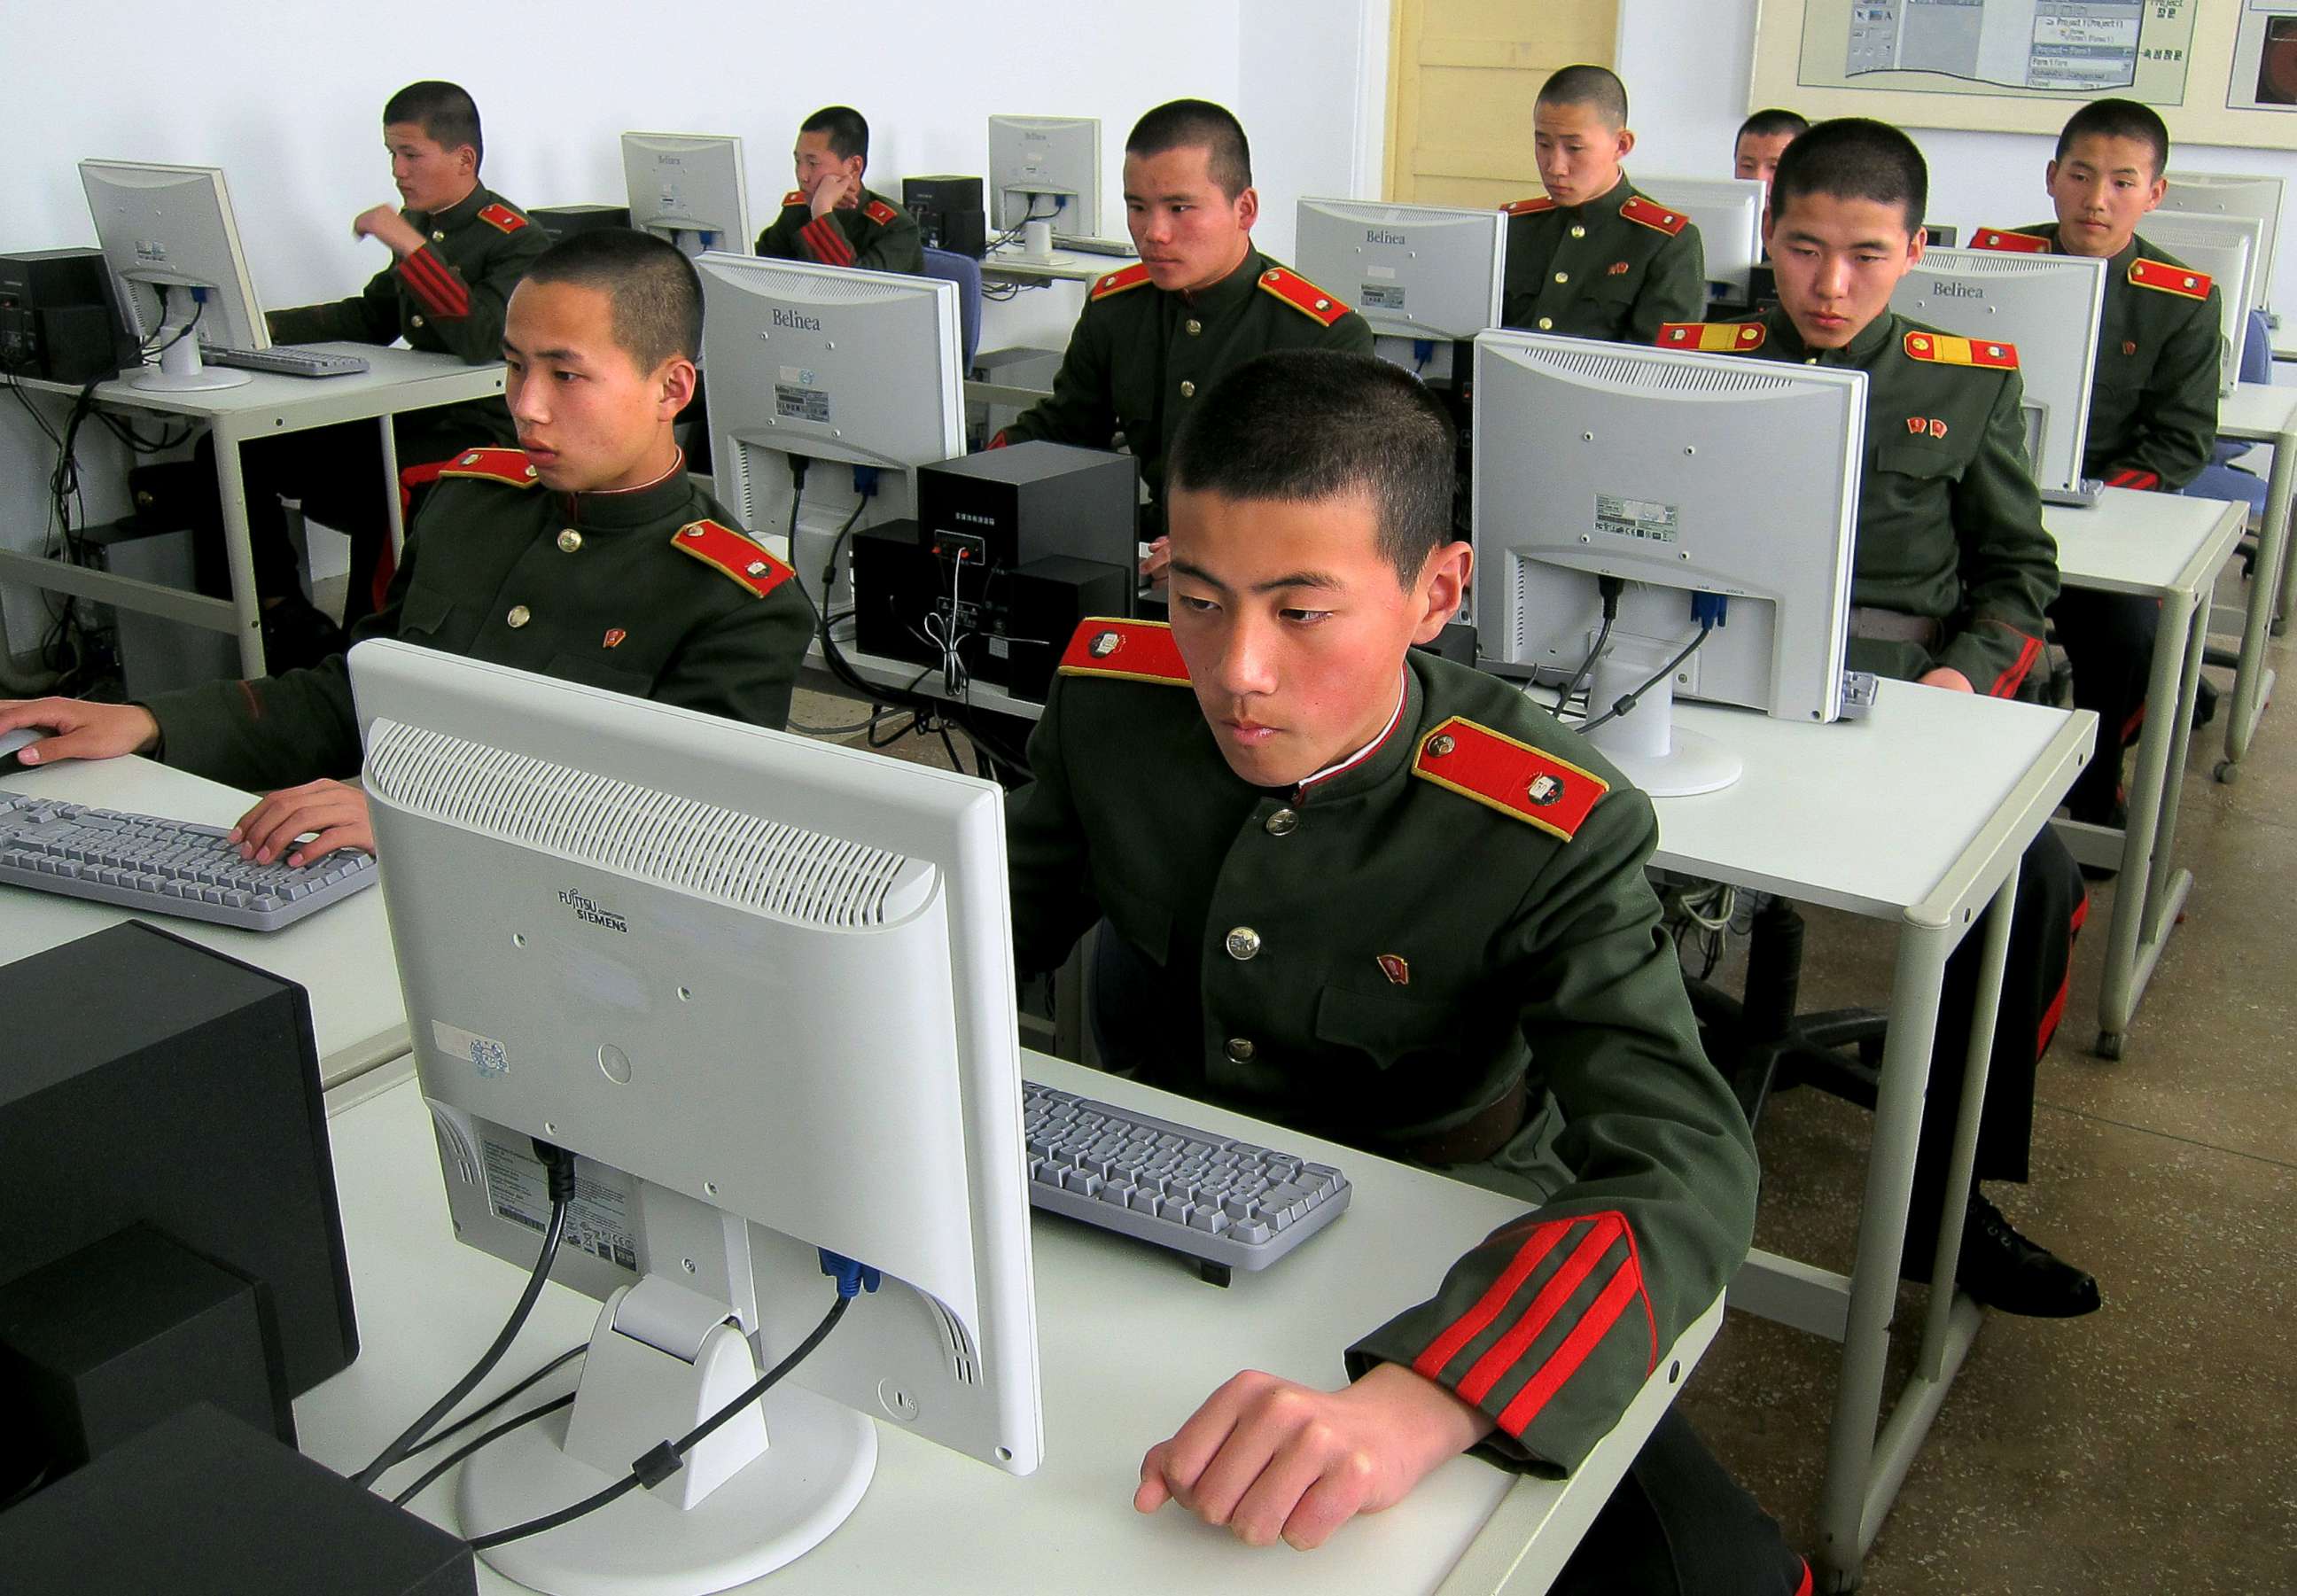 PHOTO: Students at the Mangyongdae Revolutionary School, in Pyongyang, North Korea work on computers, April 13, 2013.